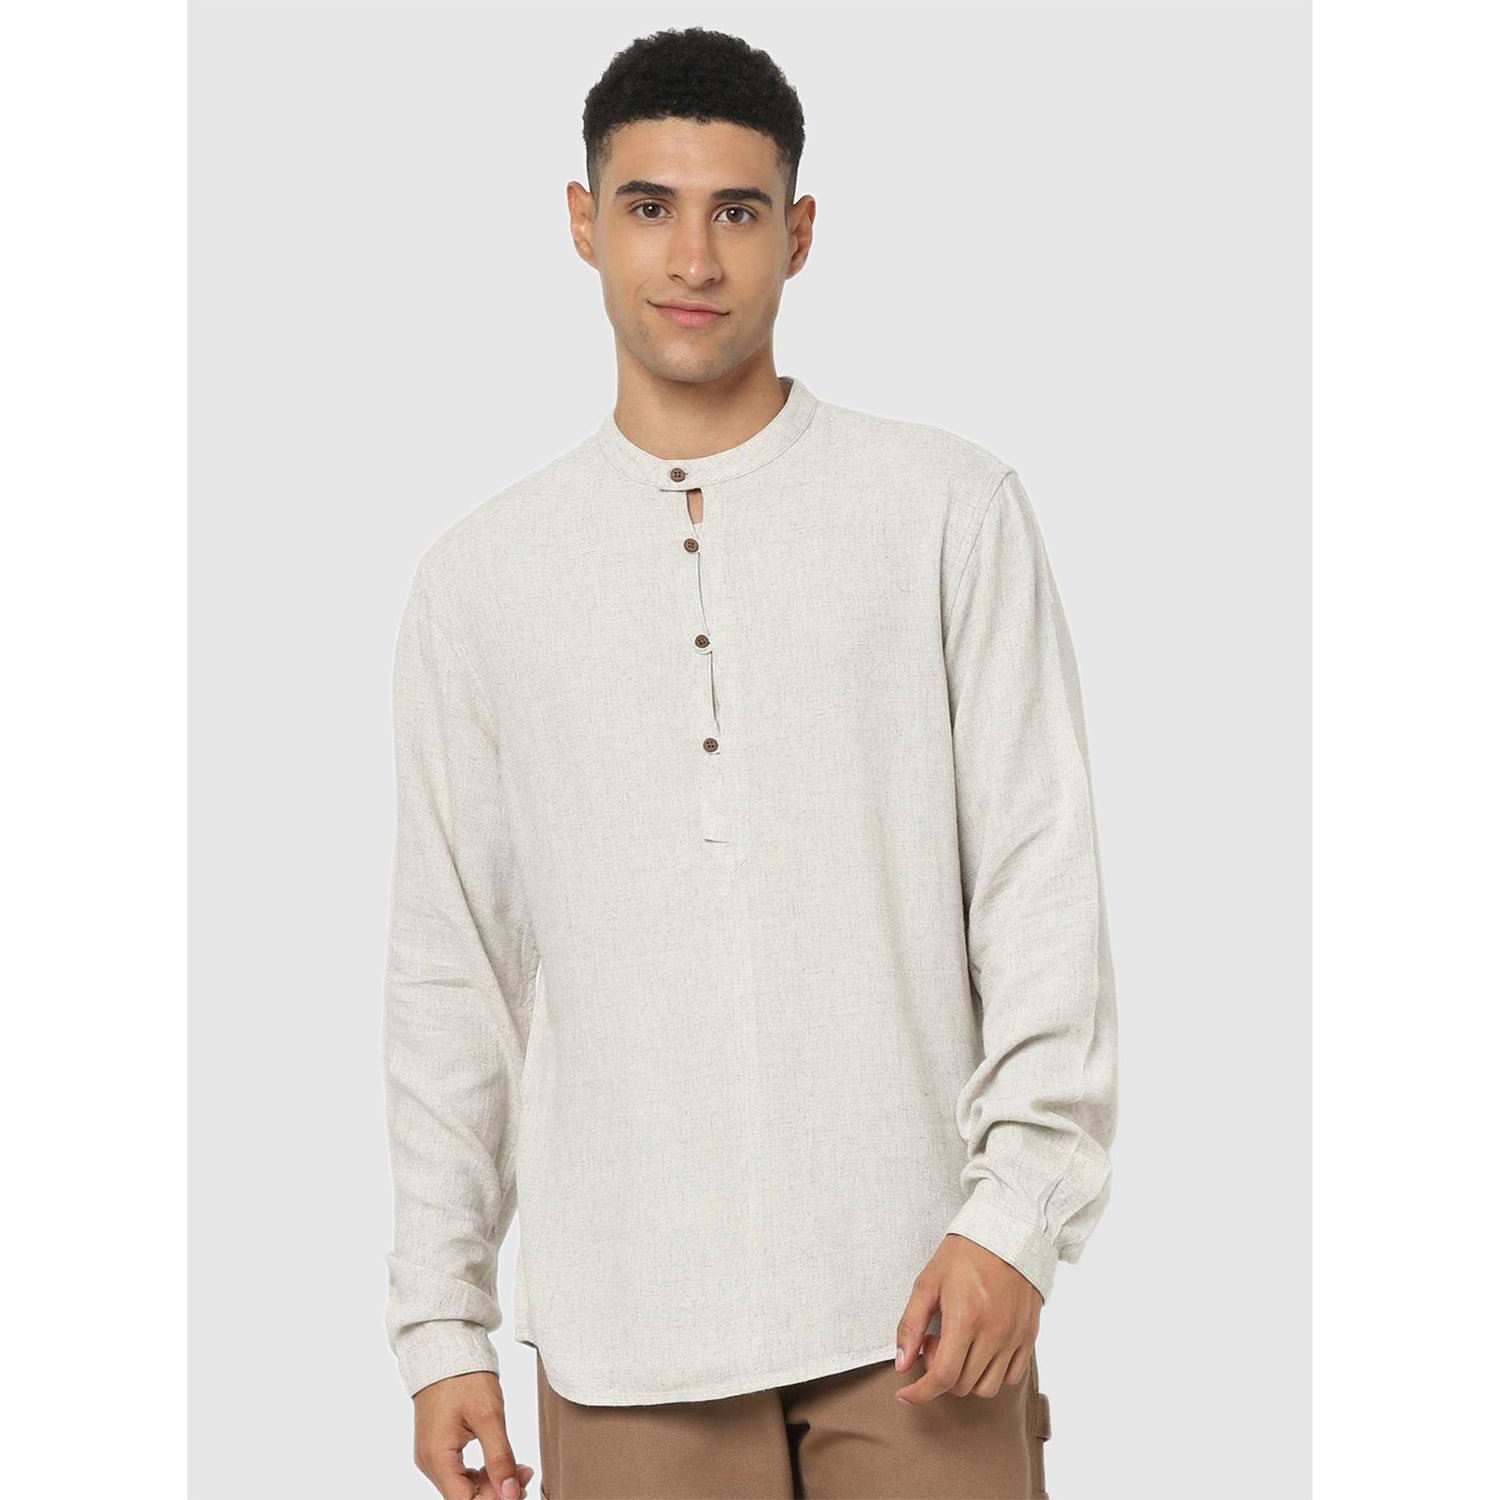 Off White Classic Printed Casual Shirt (CAMIX)